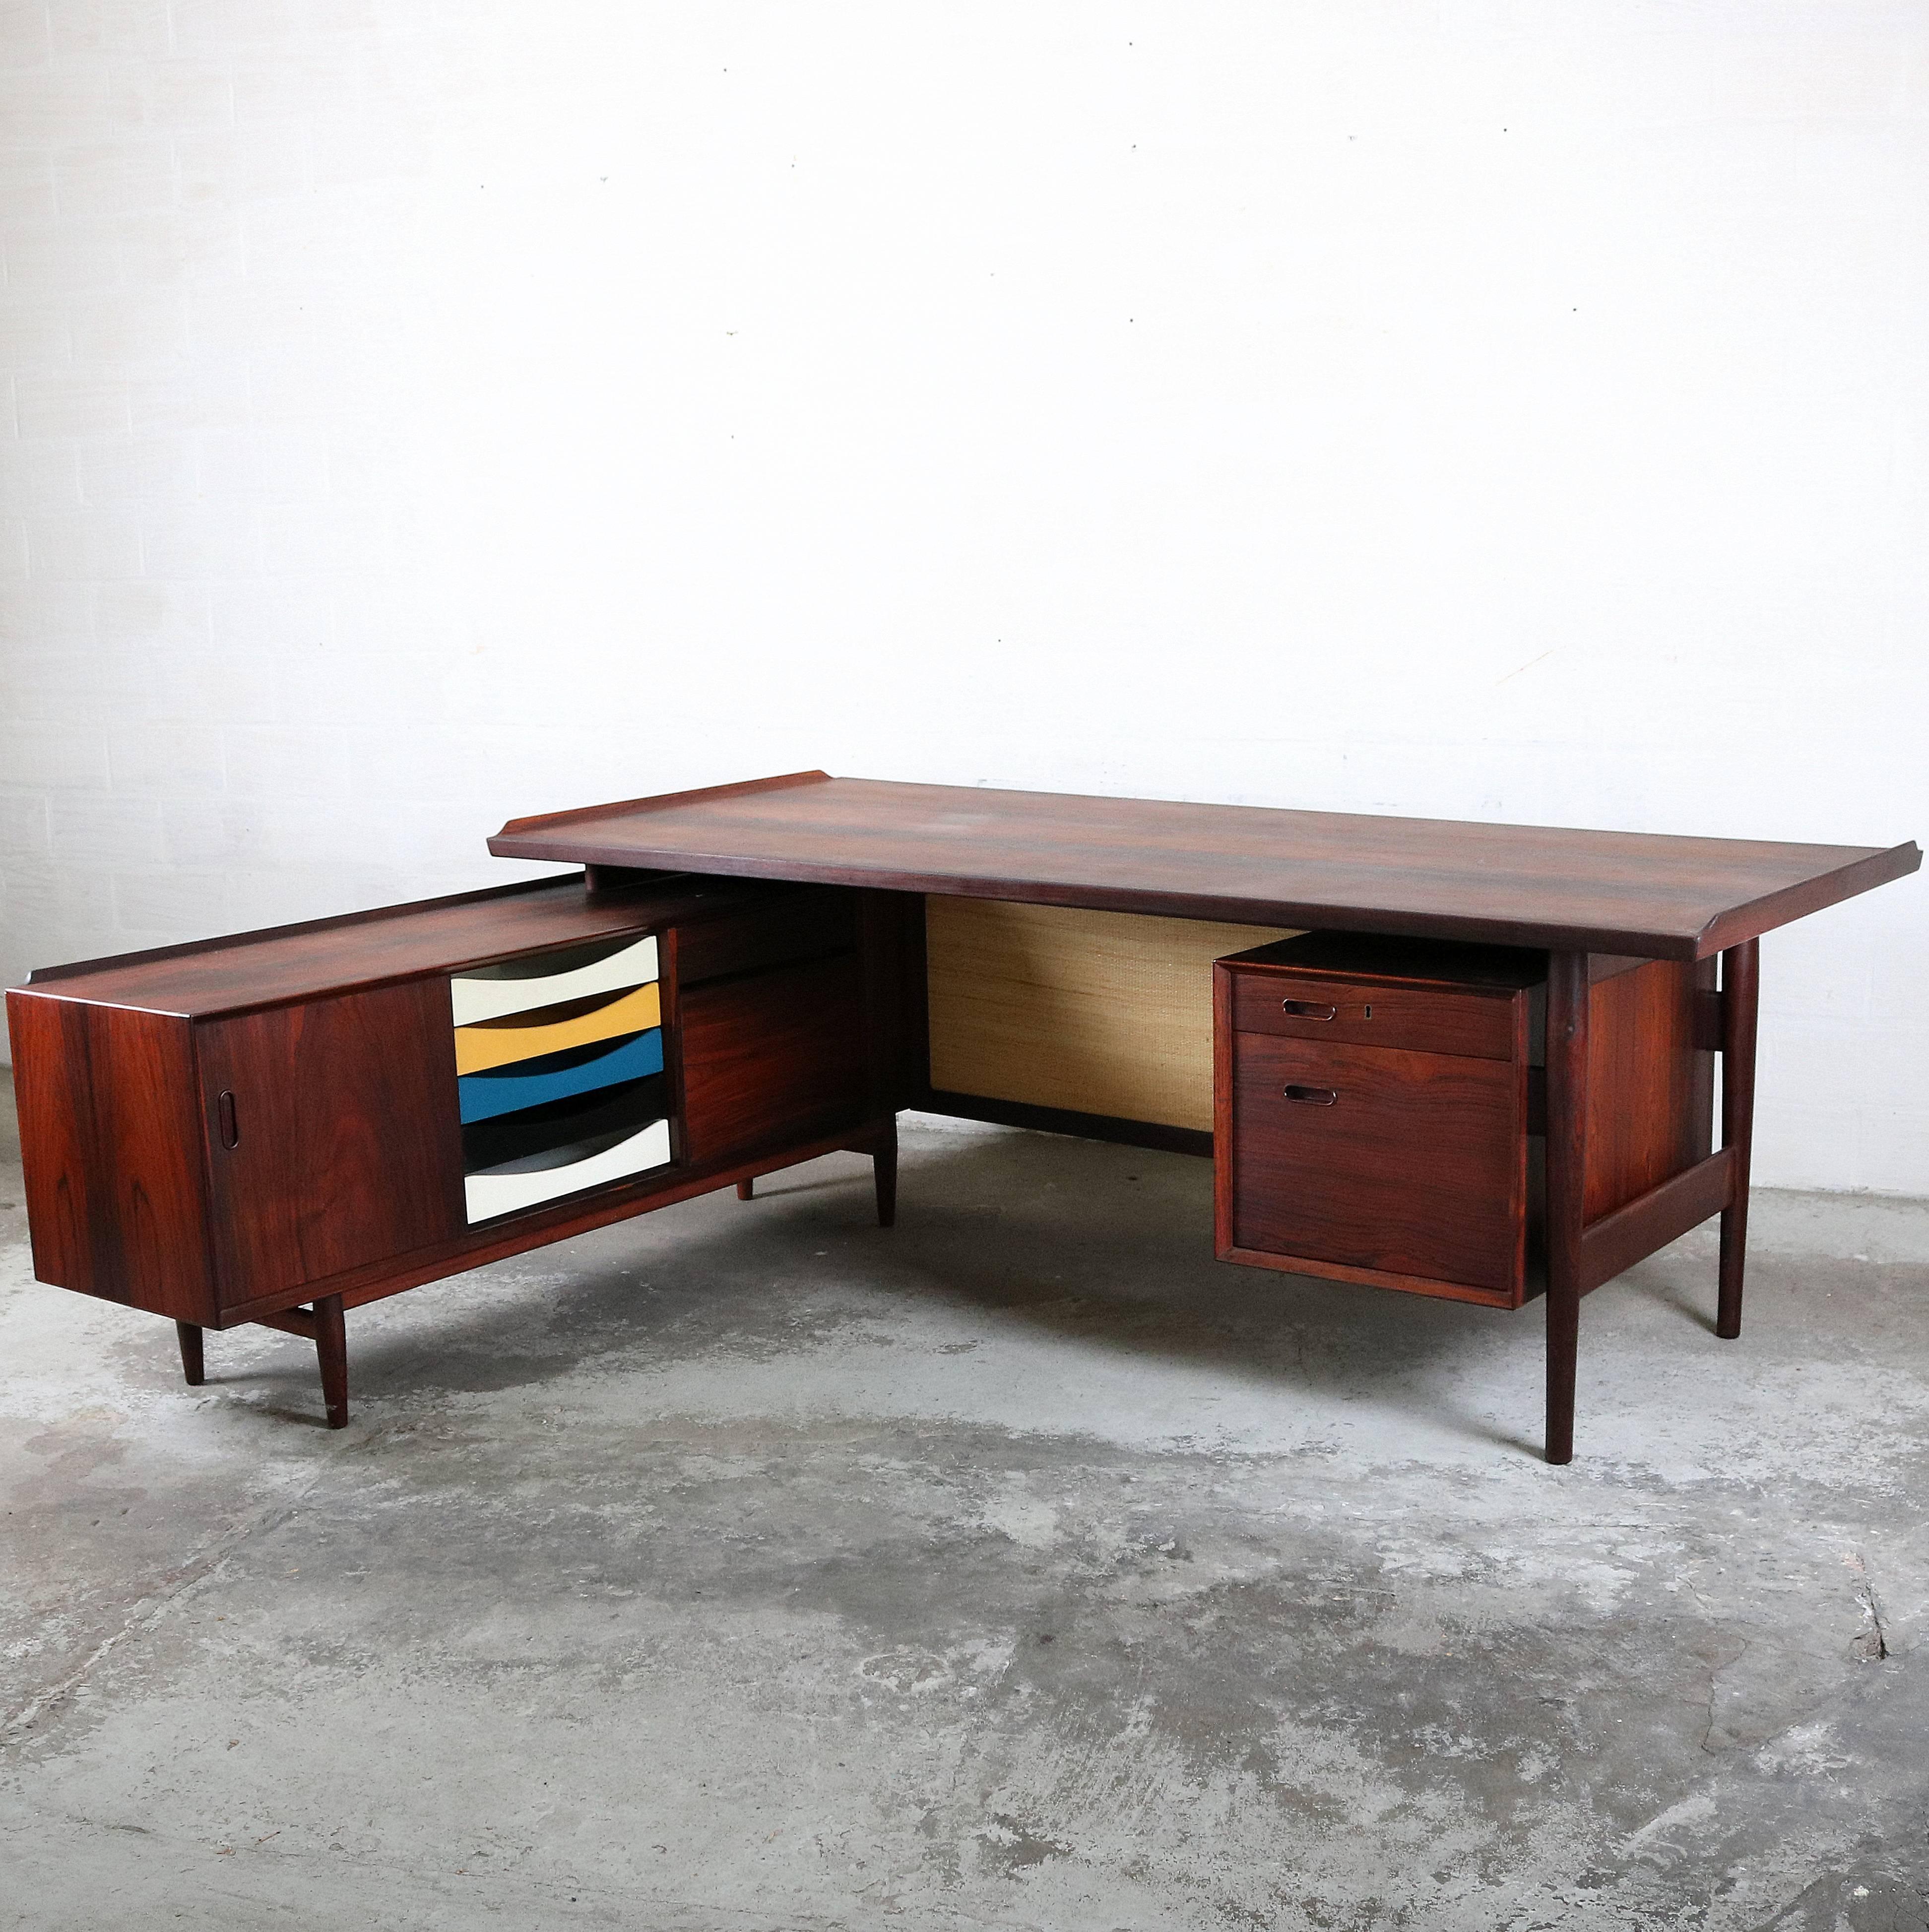 L-shaped desk designed by Arne Vodder for Sibast, Denmark, circa 1960.
This embodiment made from rosewood and seagrass panel is excusive and rare.
The desk is completely original and not restored.
The side of the board panel can be turned and has